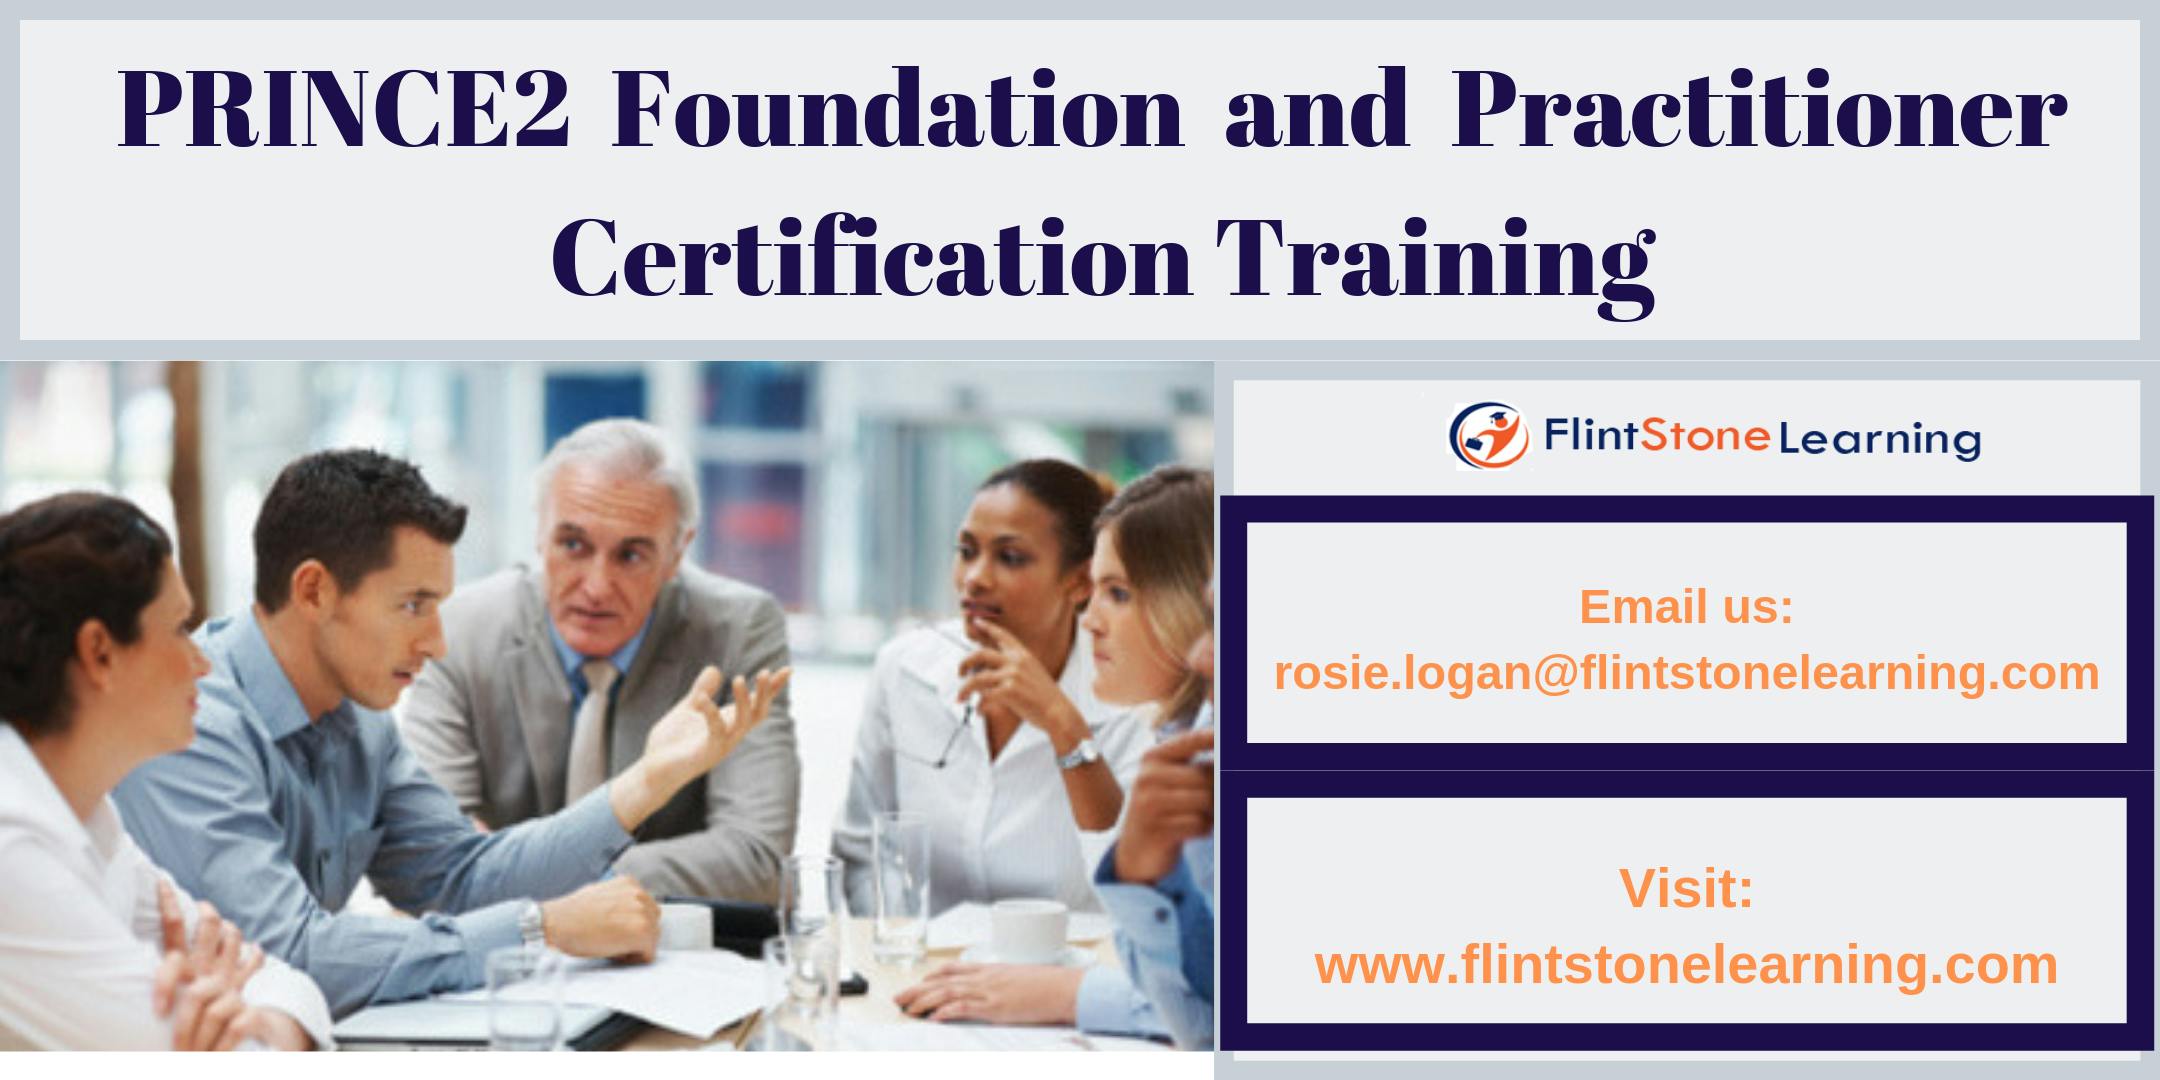 PRINCE2 Foundation and Practitioner Certification Training in Sydney,NSW